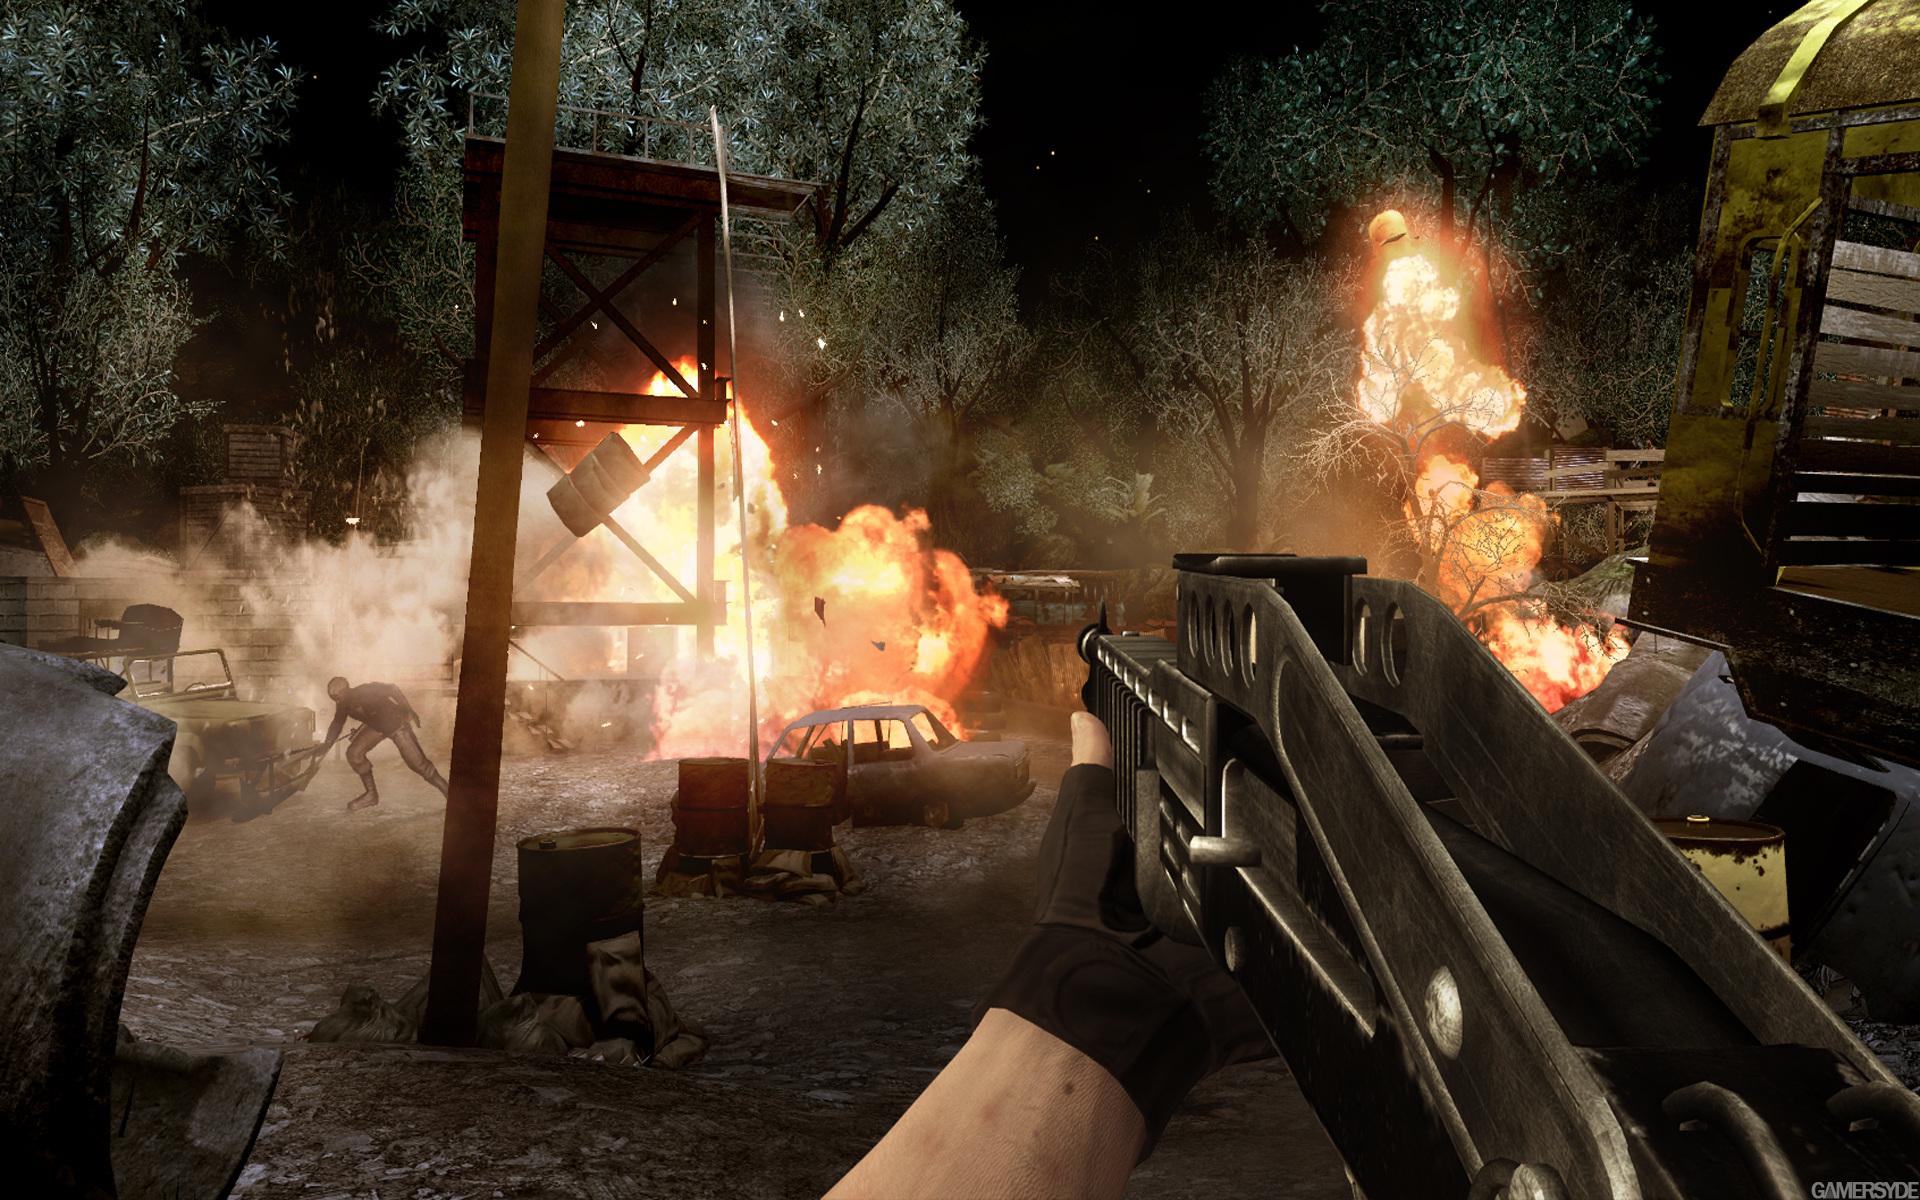 Far Cry 2: Remake 14 Minutes Of Gameplay [1440P 60FPS] 